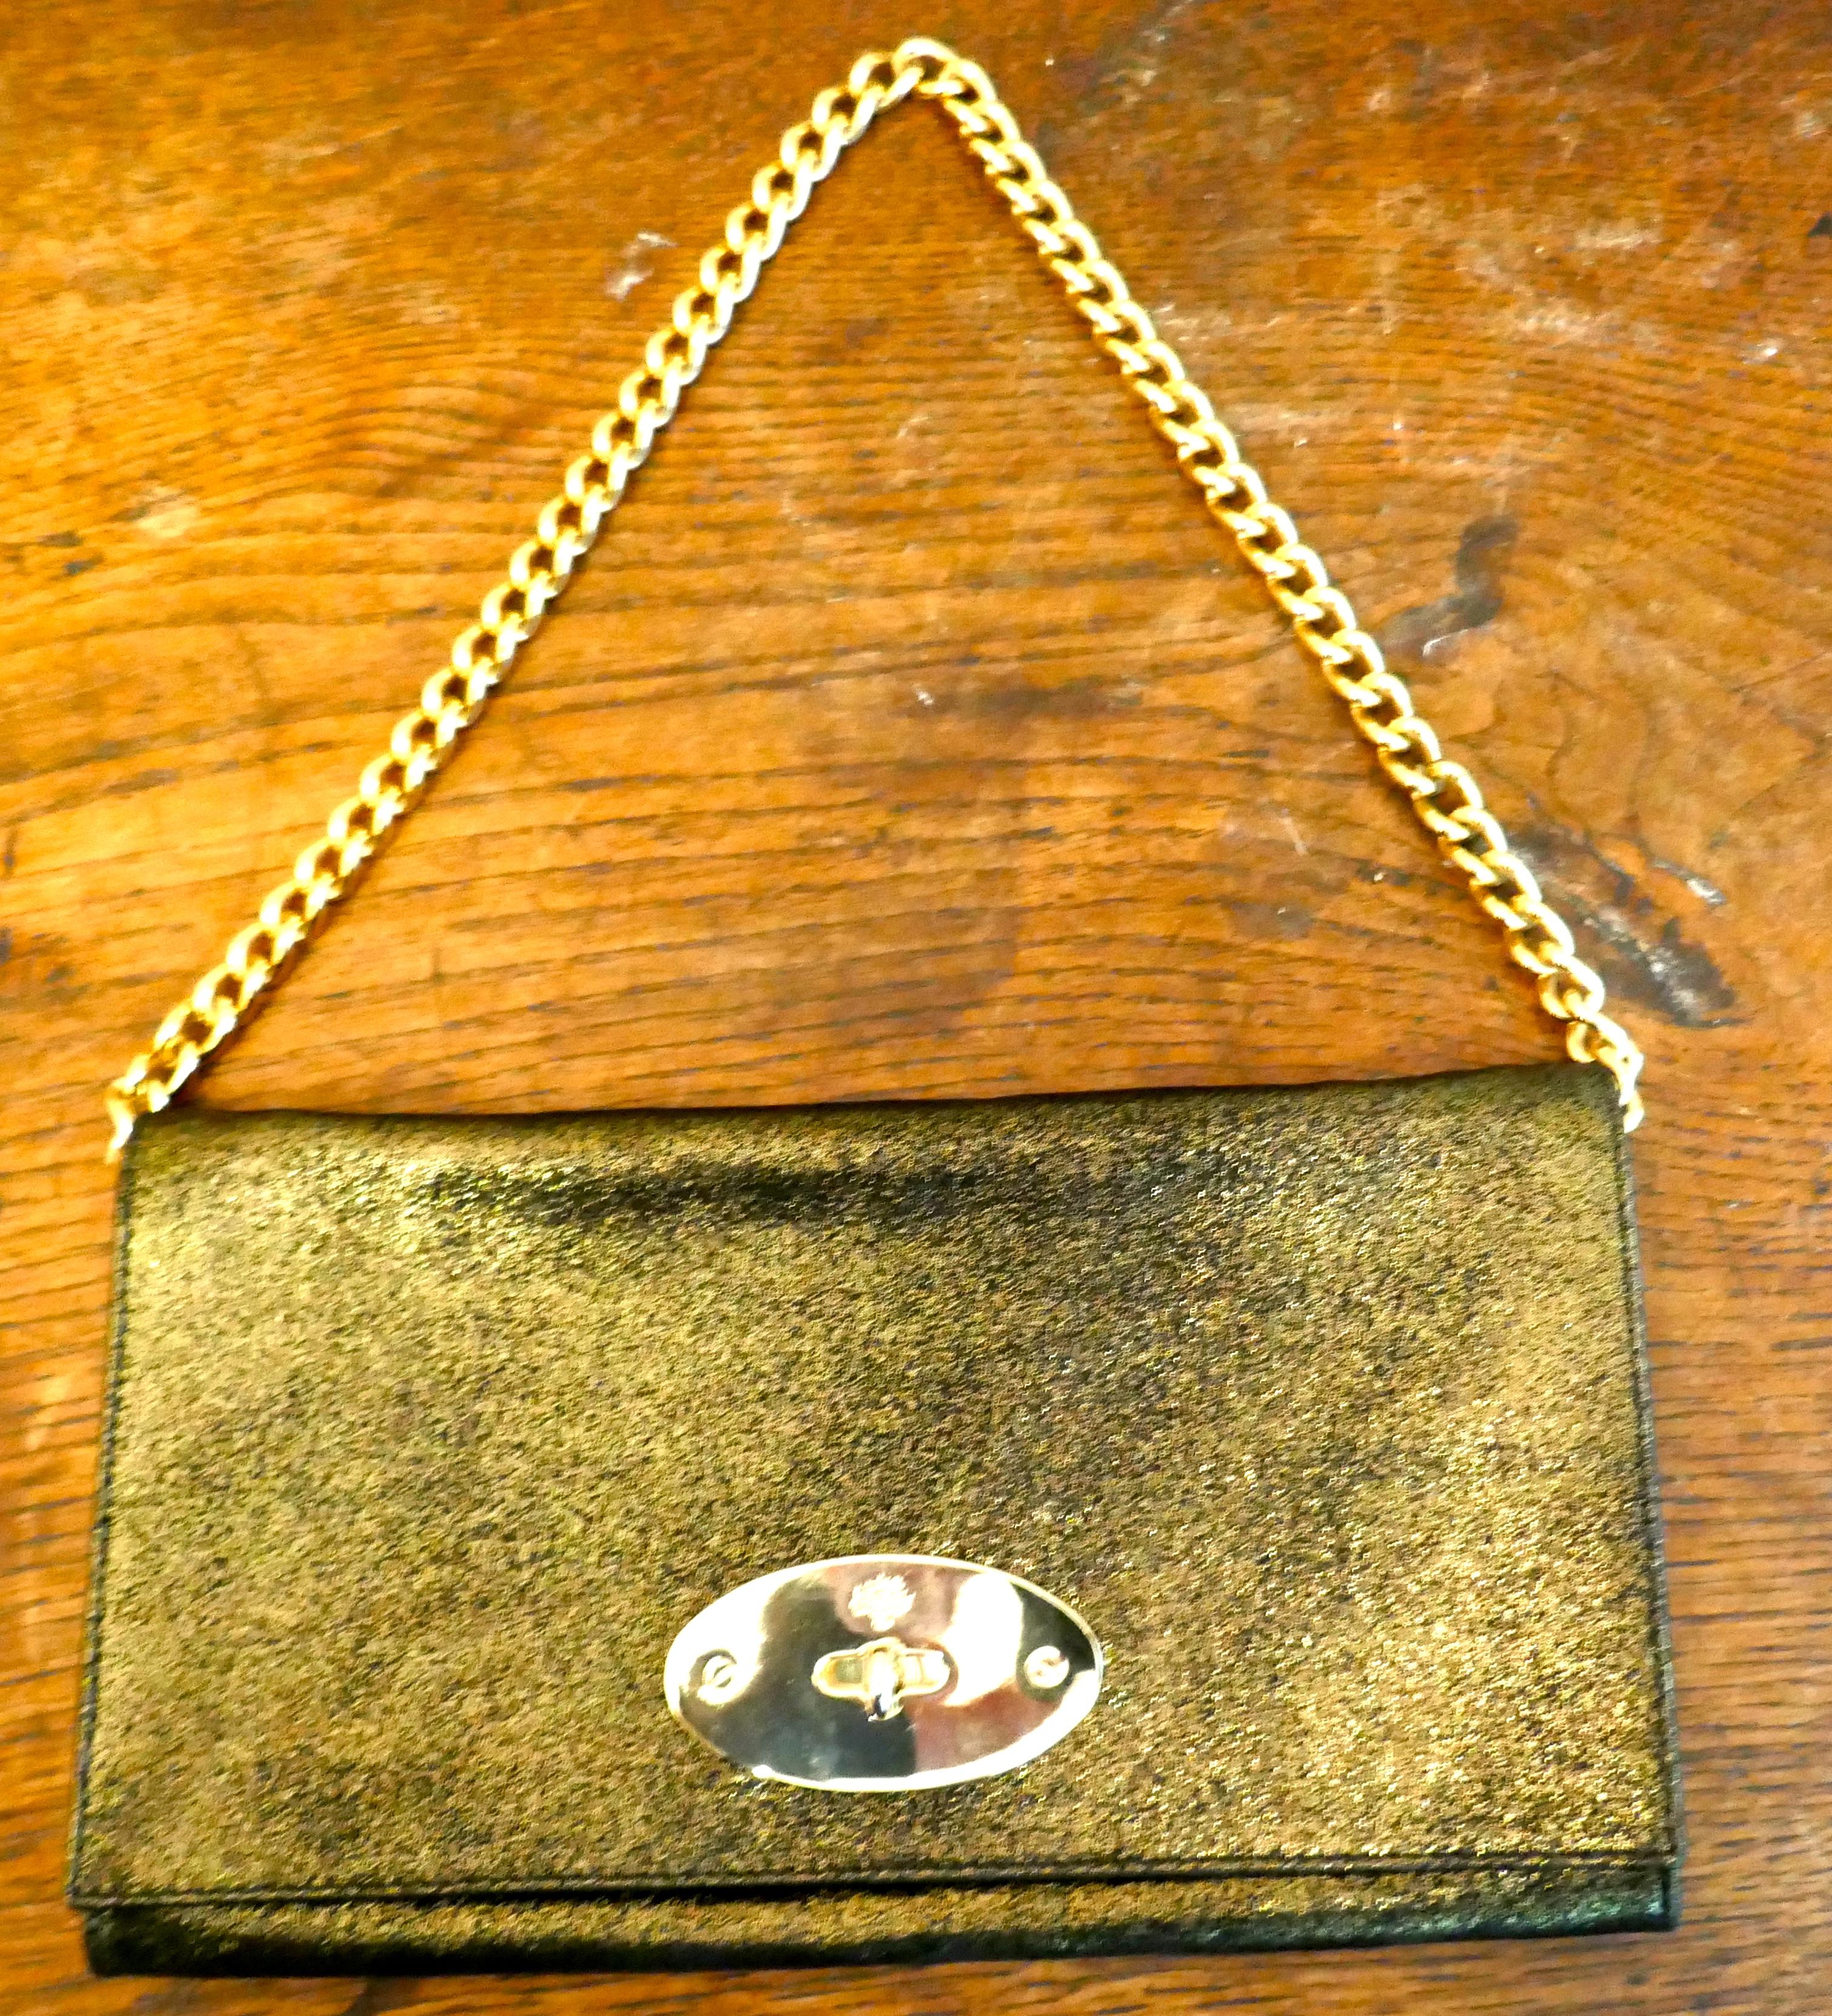 Gold Mulberry Evening Clutch or Chain Handle Bag For Sale 4